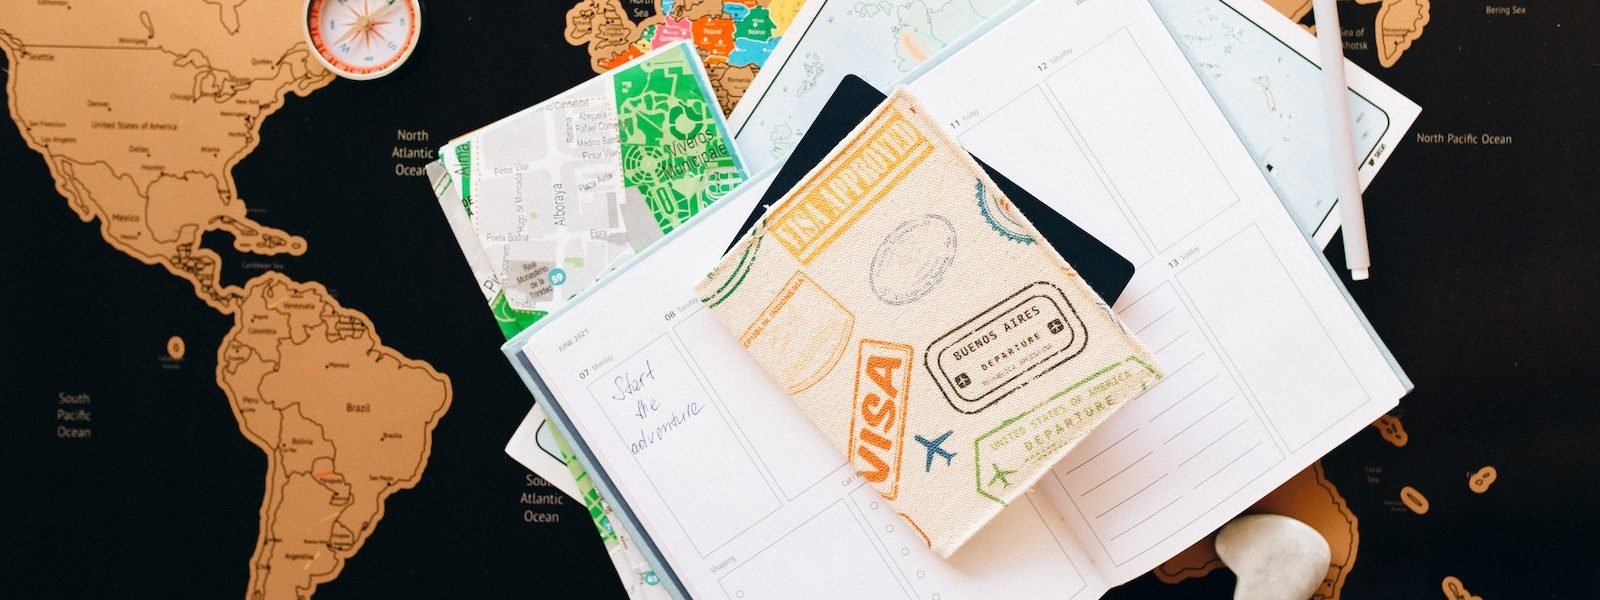 Passport on Top of a Planner